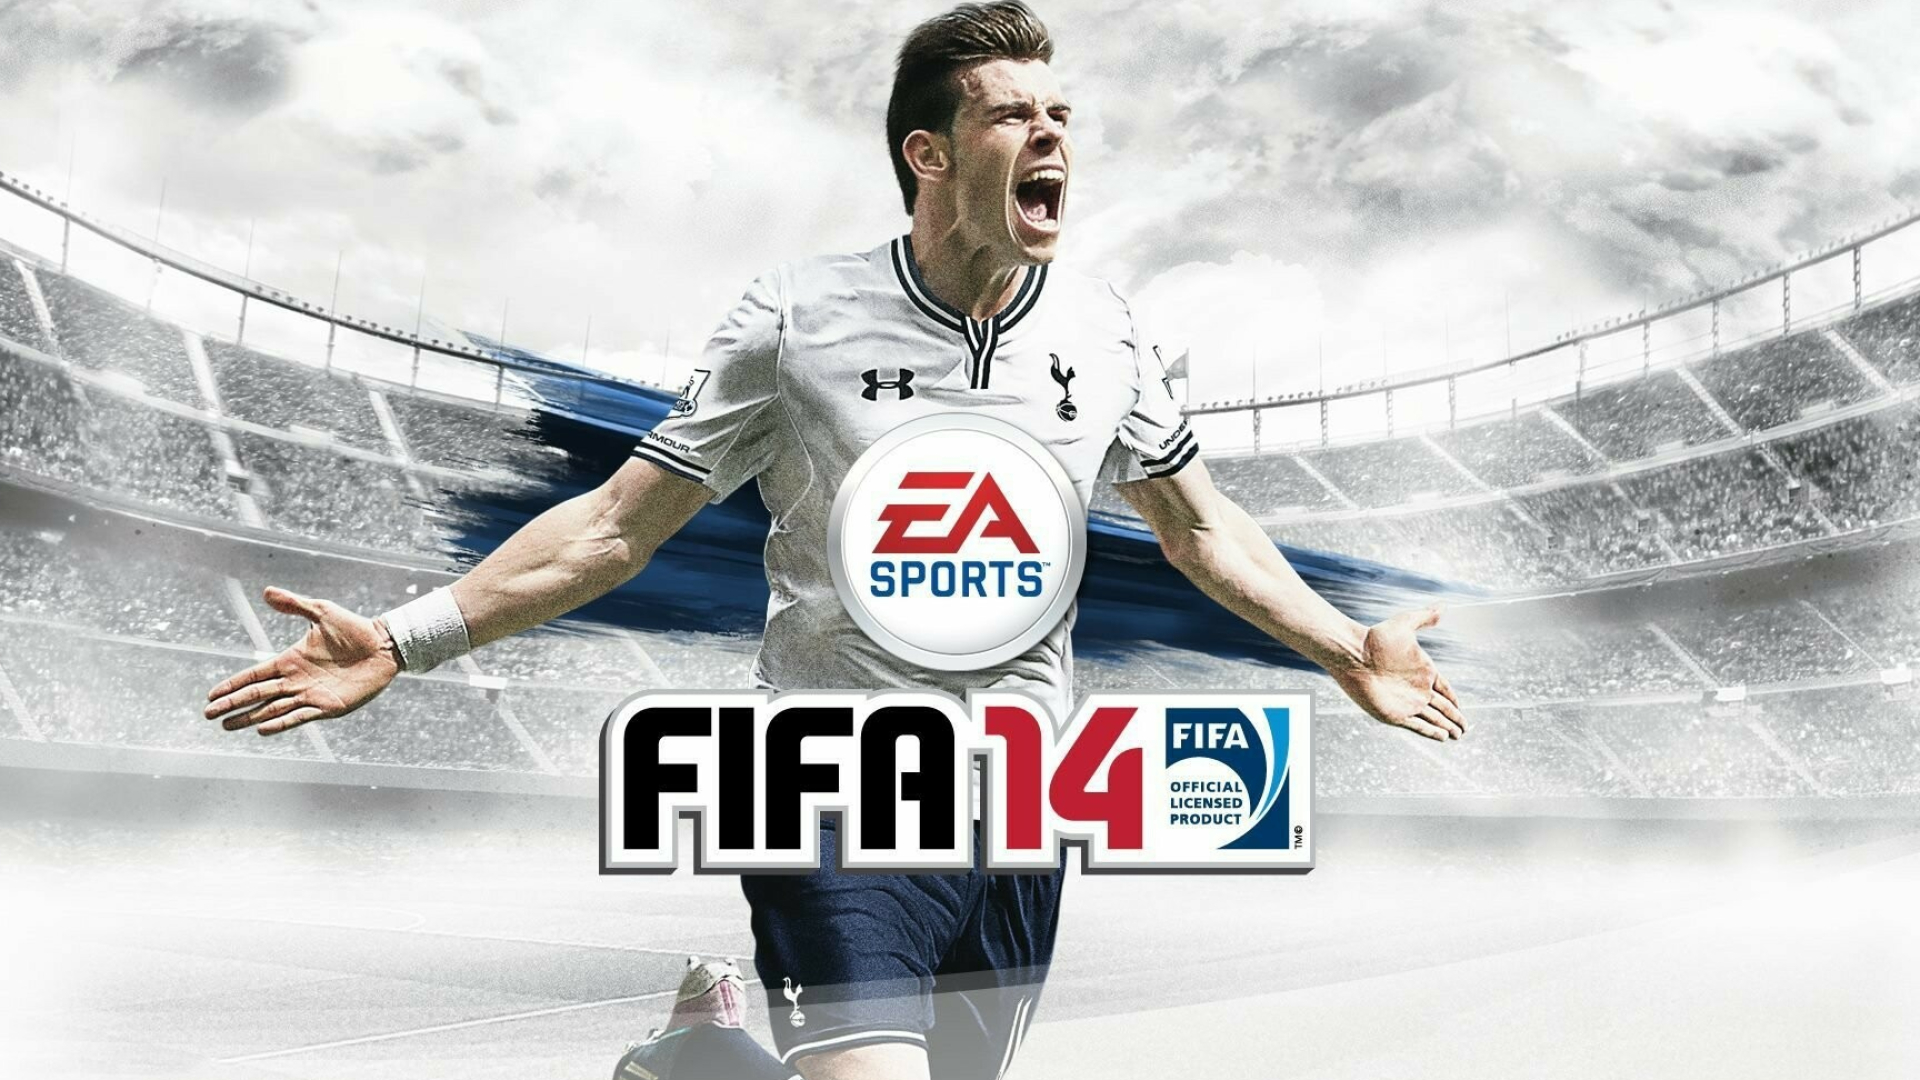 FIFA: The game features 33 fully licensed leagues, World Cup, Soccer video game. 1920x1080 Full HD Wallpaper.